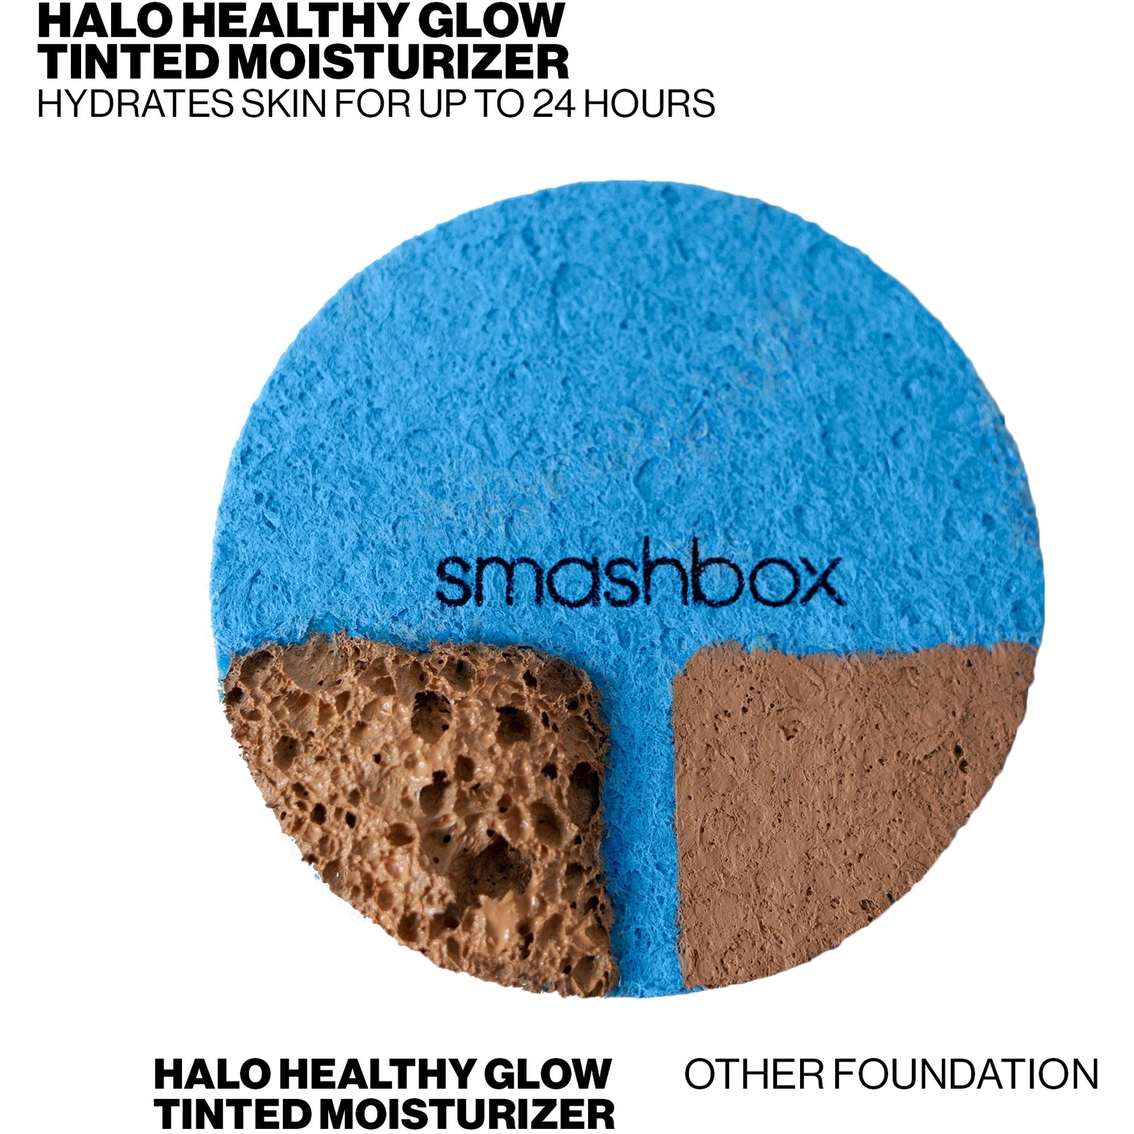 smashbox Halo Healthy Glow All-In-One Tinted Moisturizer SPF 25 - Image 6 of 10